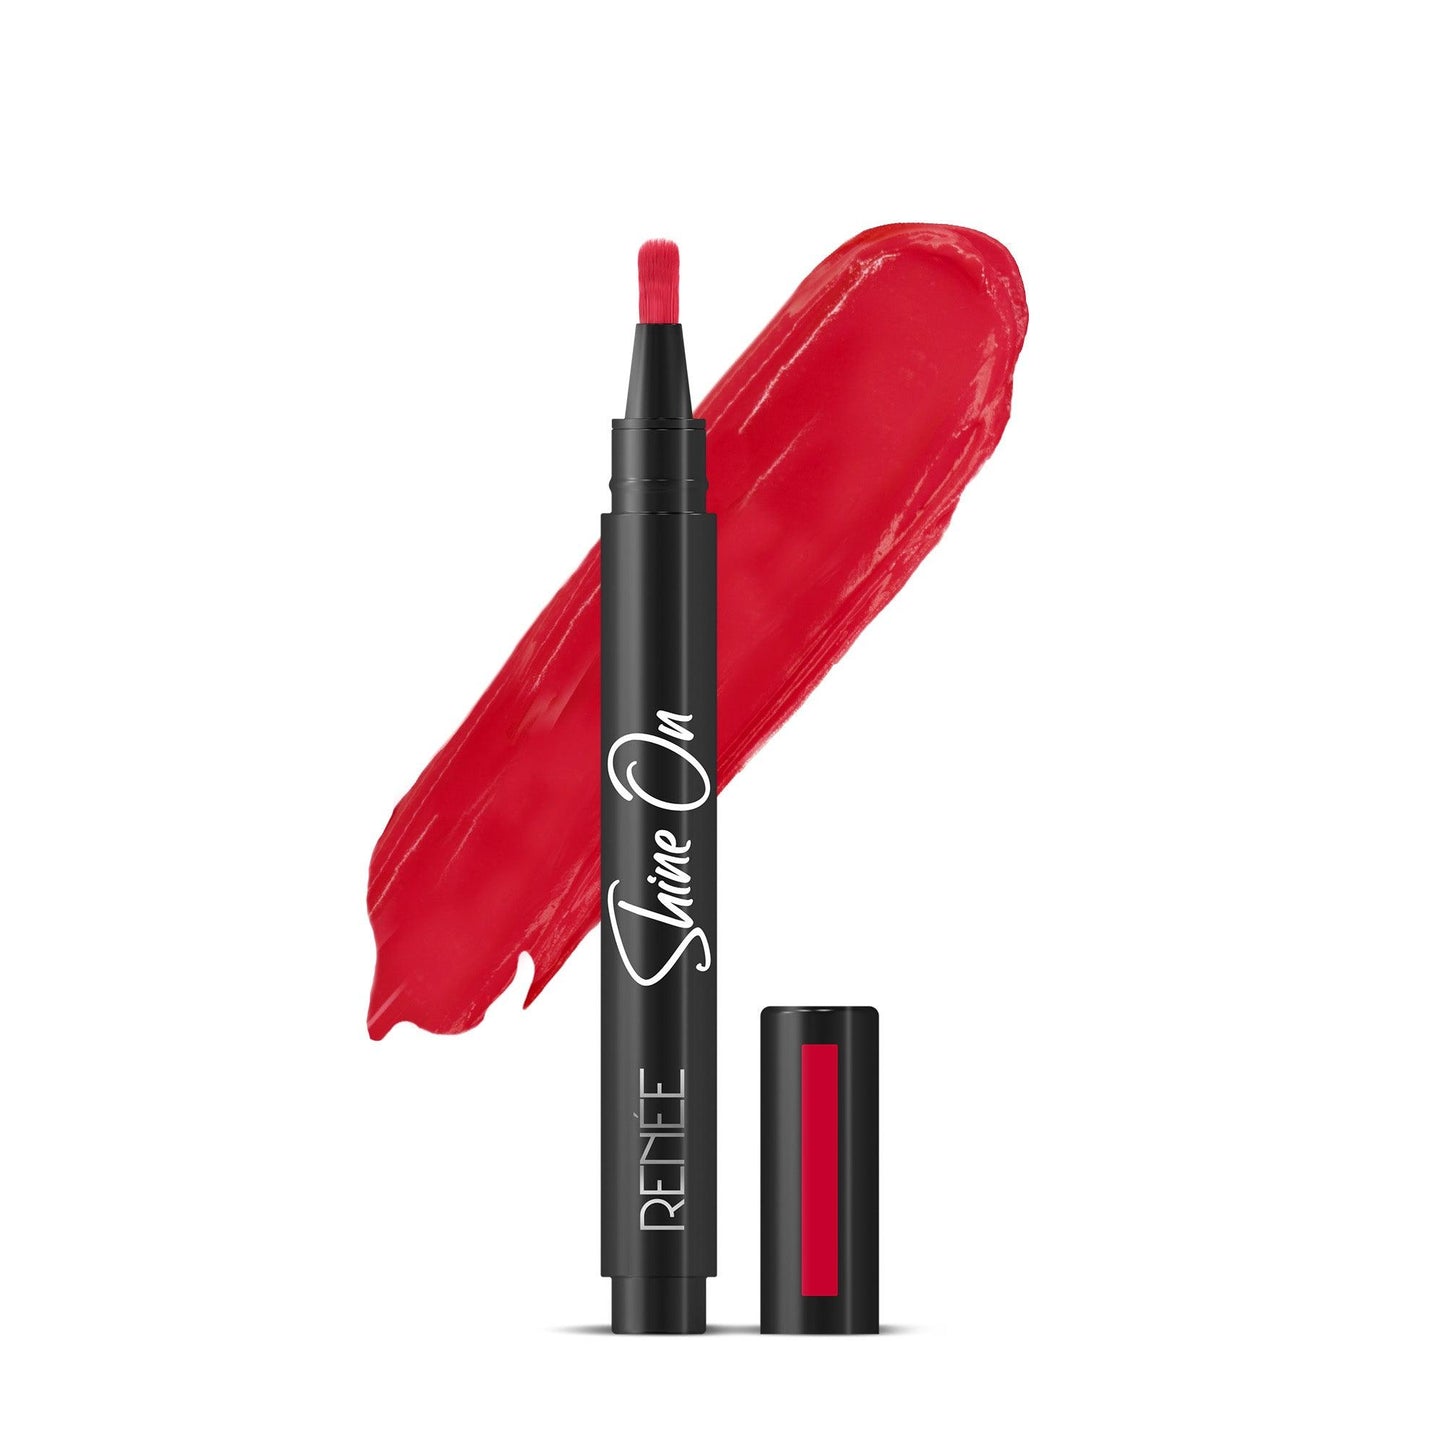 Renee Shine On Lip Lacquer 1.8ml - Scarlet Spark